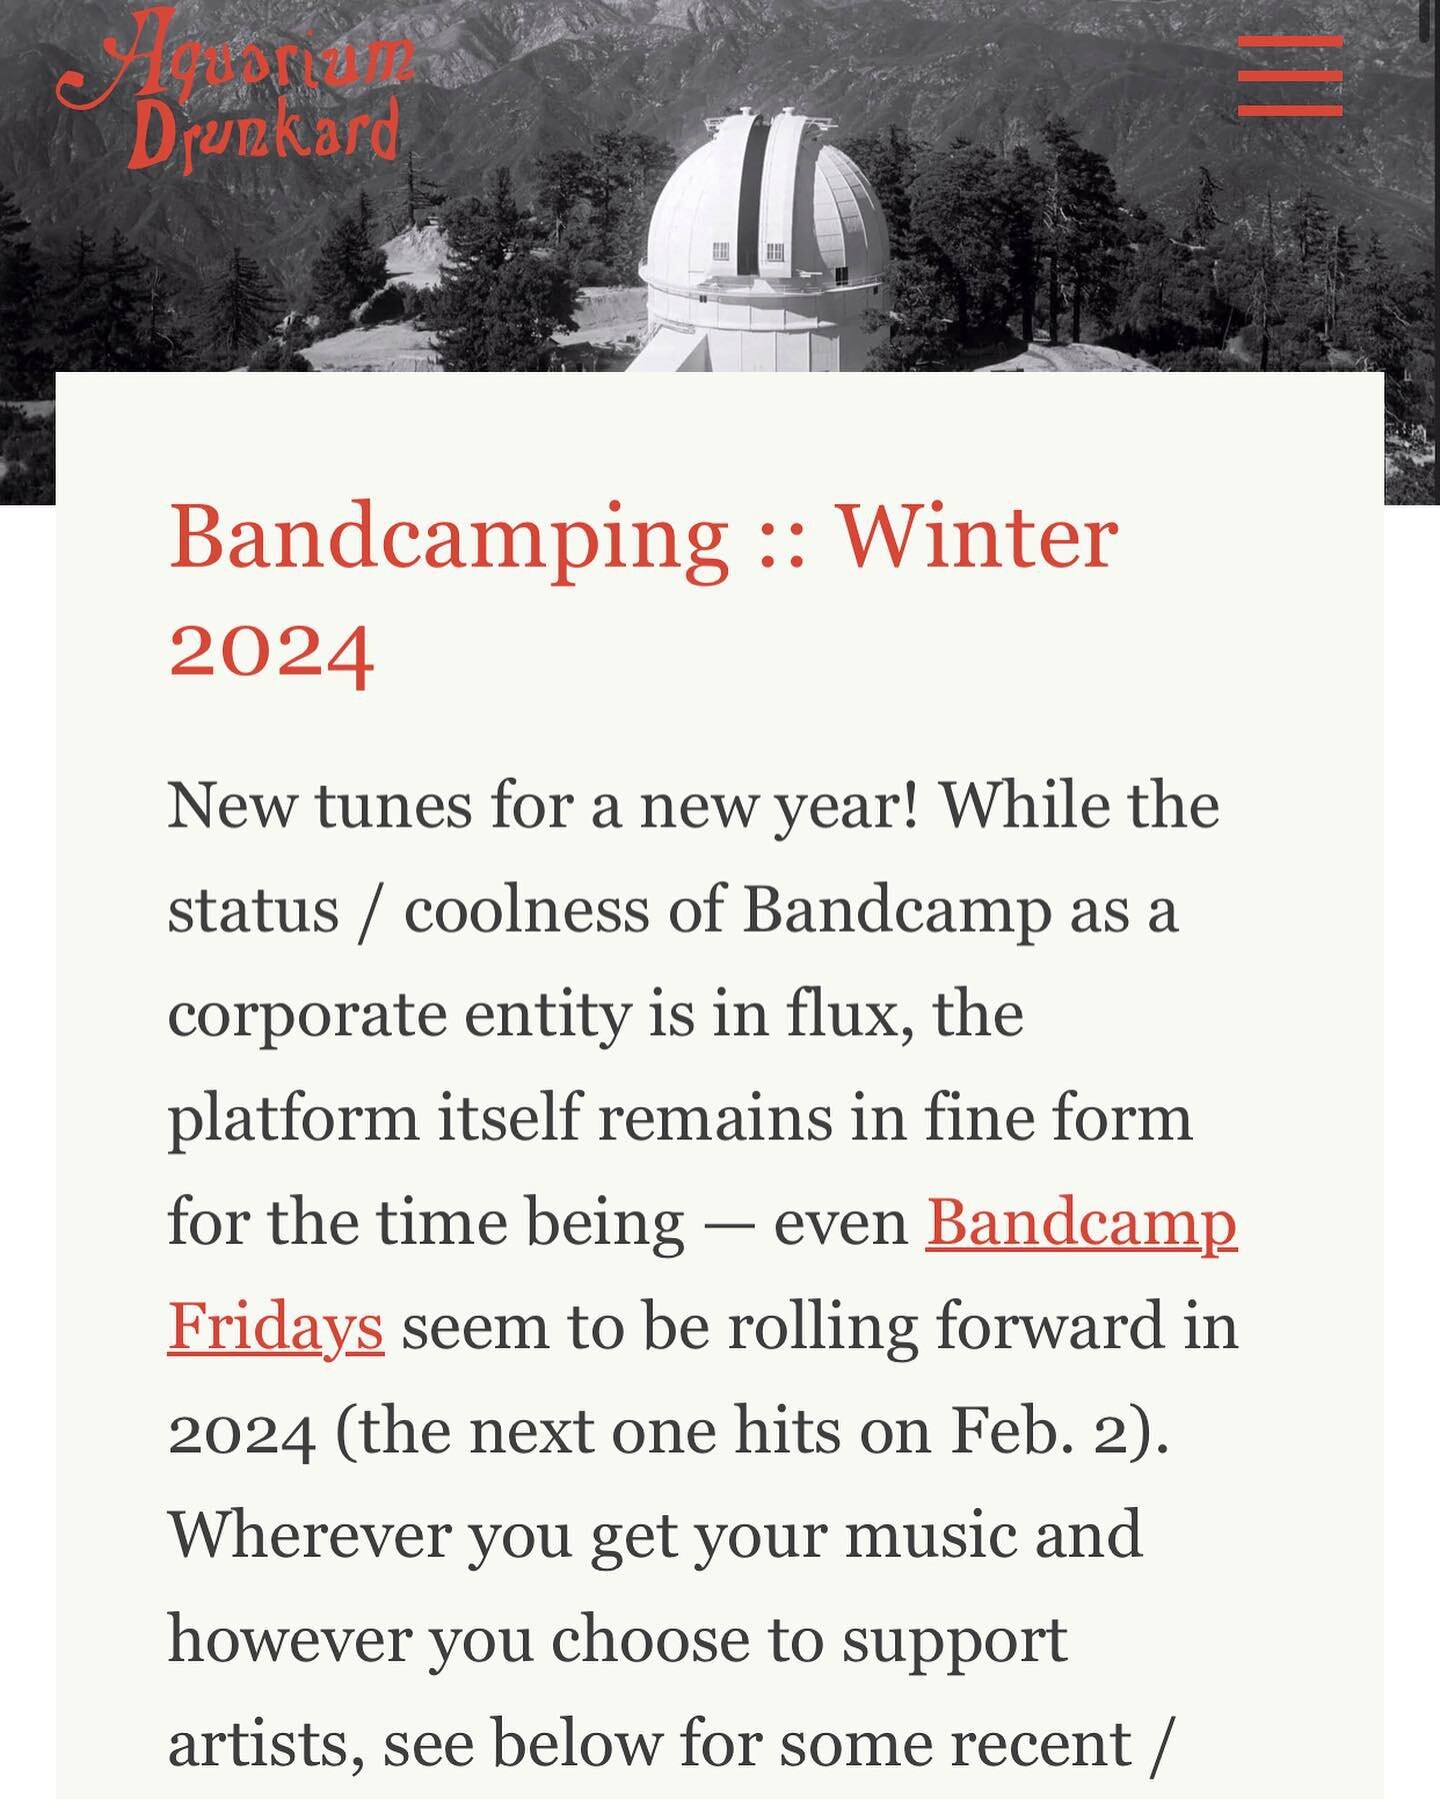 MEASURE, POUR &amp; MIXTAPE: MUSIC FOR COOKING is &quot;a perfect blend of flavors,&quot; says @wilcoxtyler in the Winter 2024 edition of @aquariumdrunkard&rsquo;s Bandcamping. Listen to the delicious mixture of contributions by Michael Hurley, @lou_